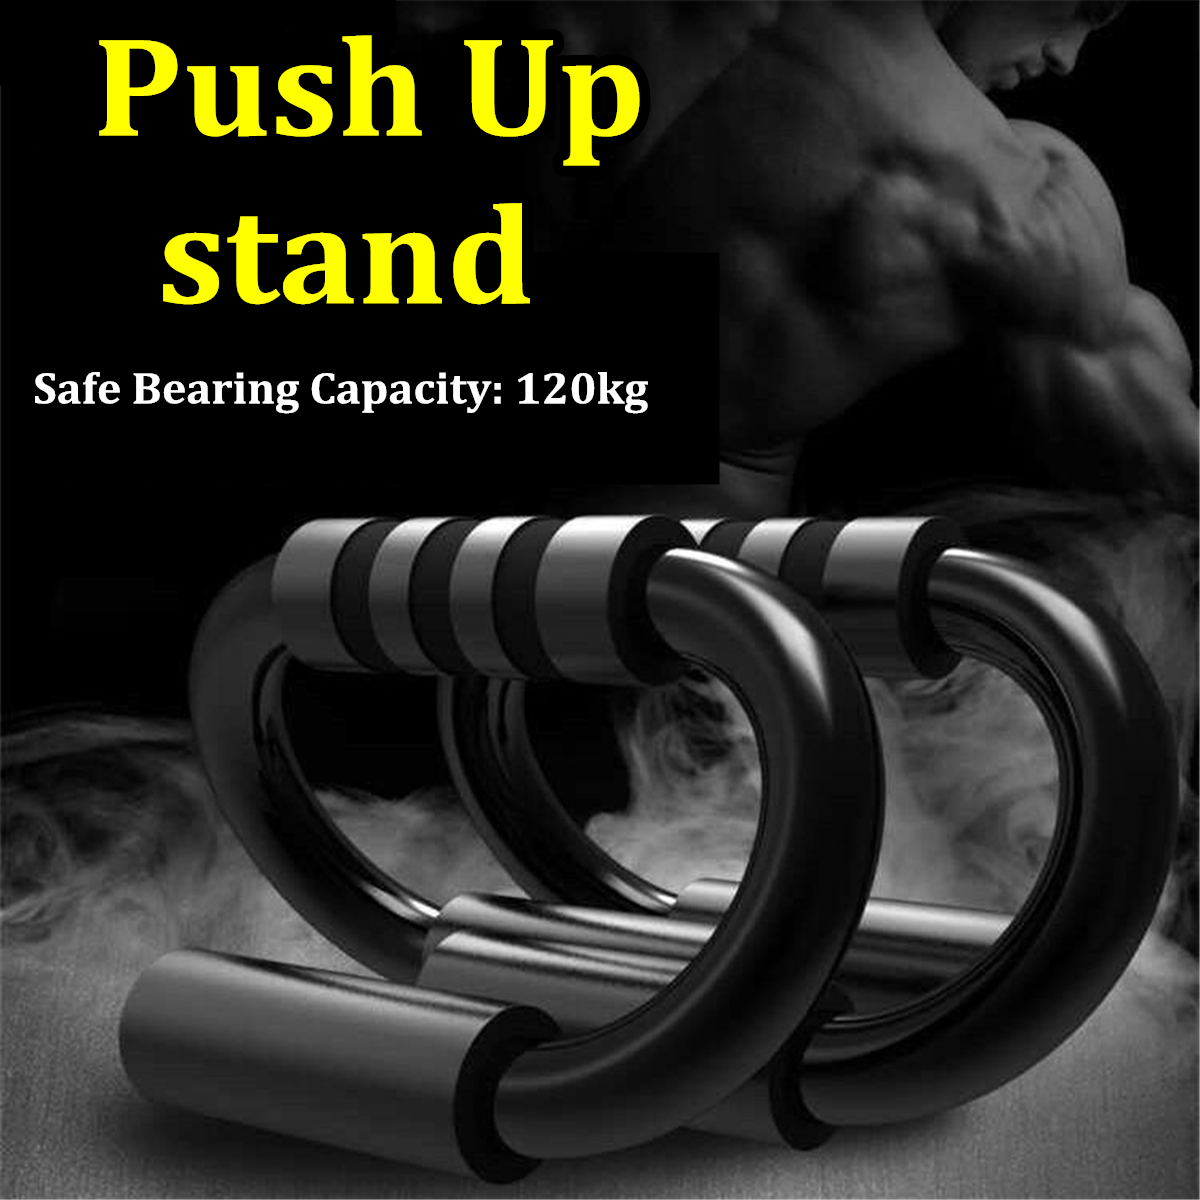 Abdominal-Roller-Fitness-Slimming-Core-Workout-Ab-Wheel-Roller-Push-Ups-Stand-with-Kneeling-Pad-1697962-5